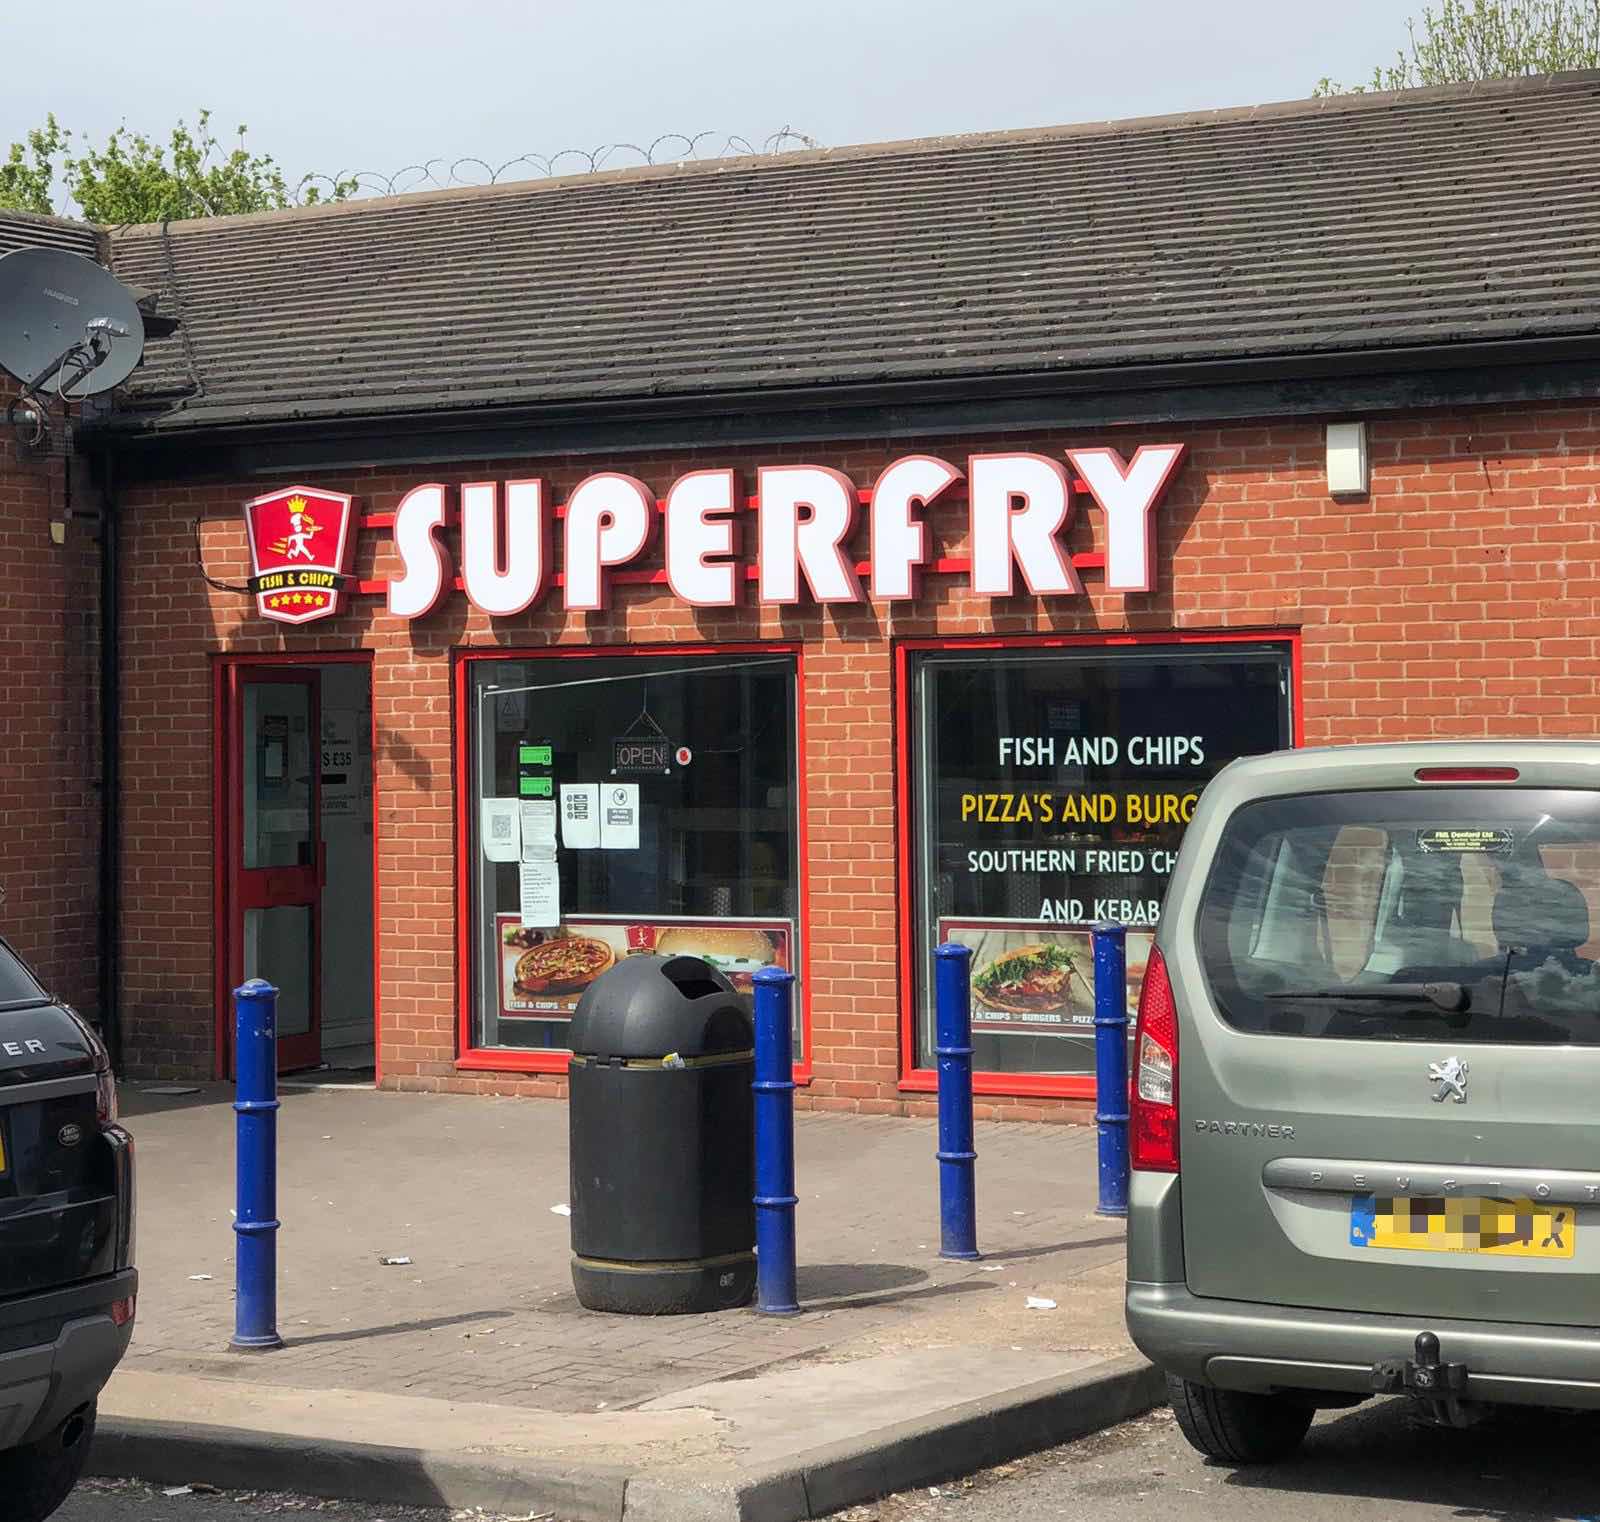 Superfry, Leicester